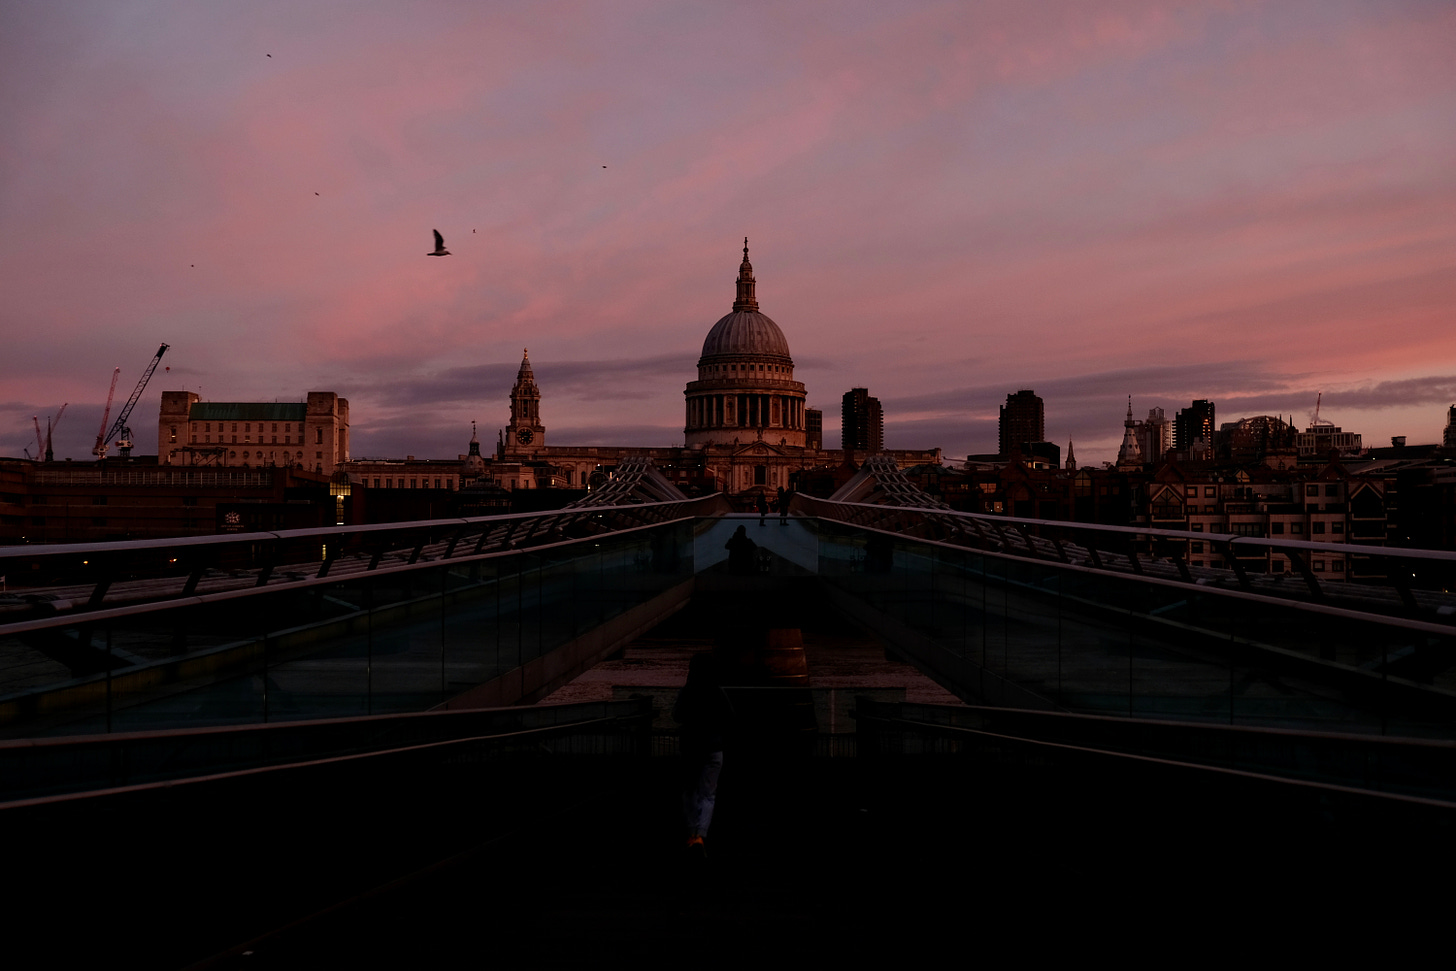 A pink and purple sunrise in London over St. Paul's Cathedral, with a view of Millennium Bridge in the foreground.